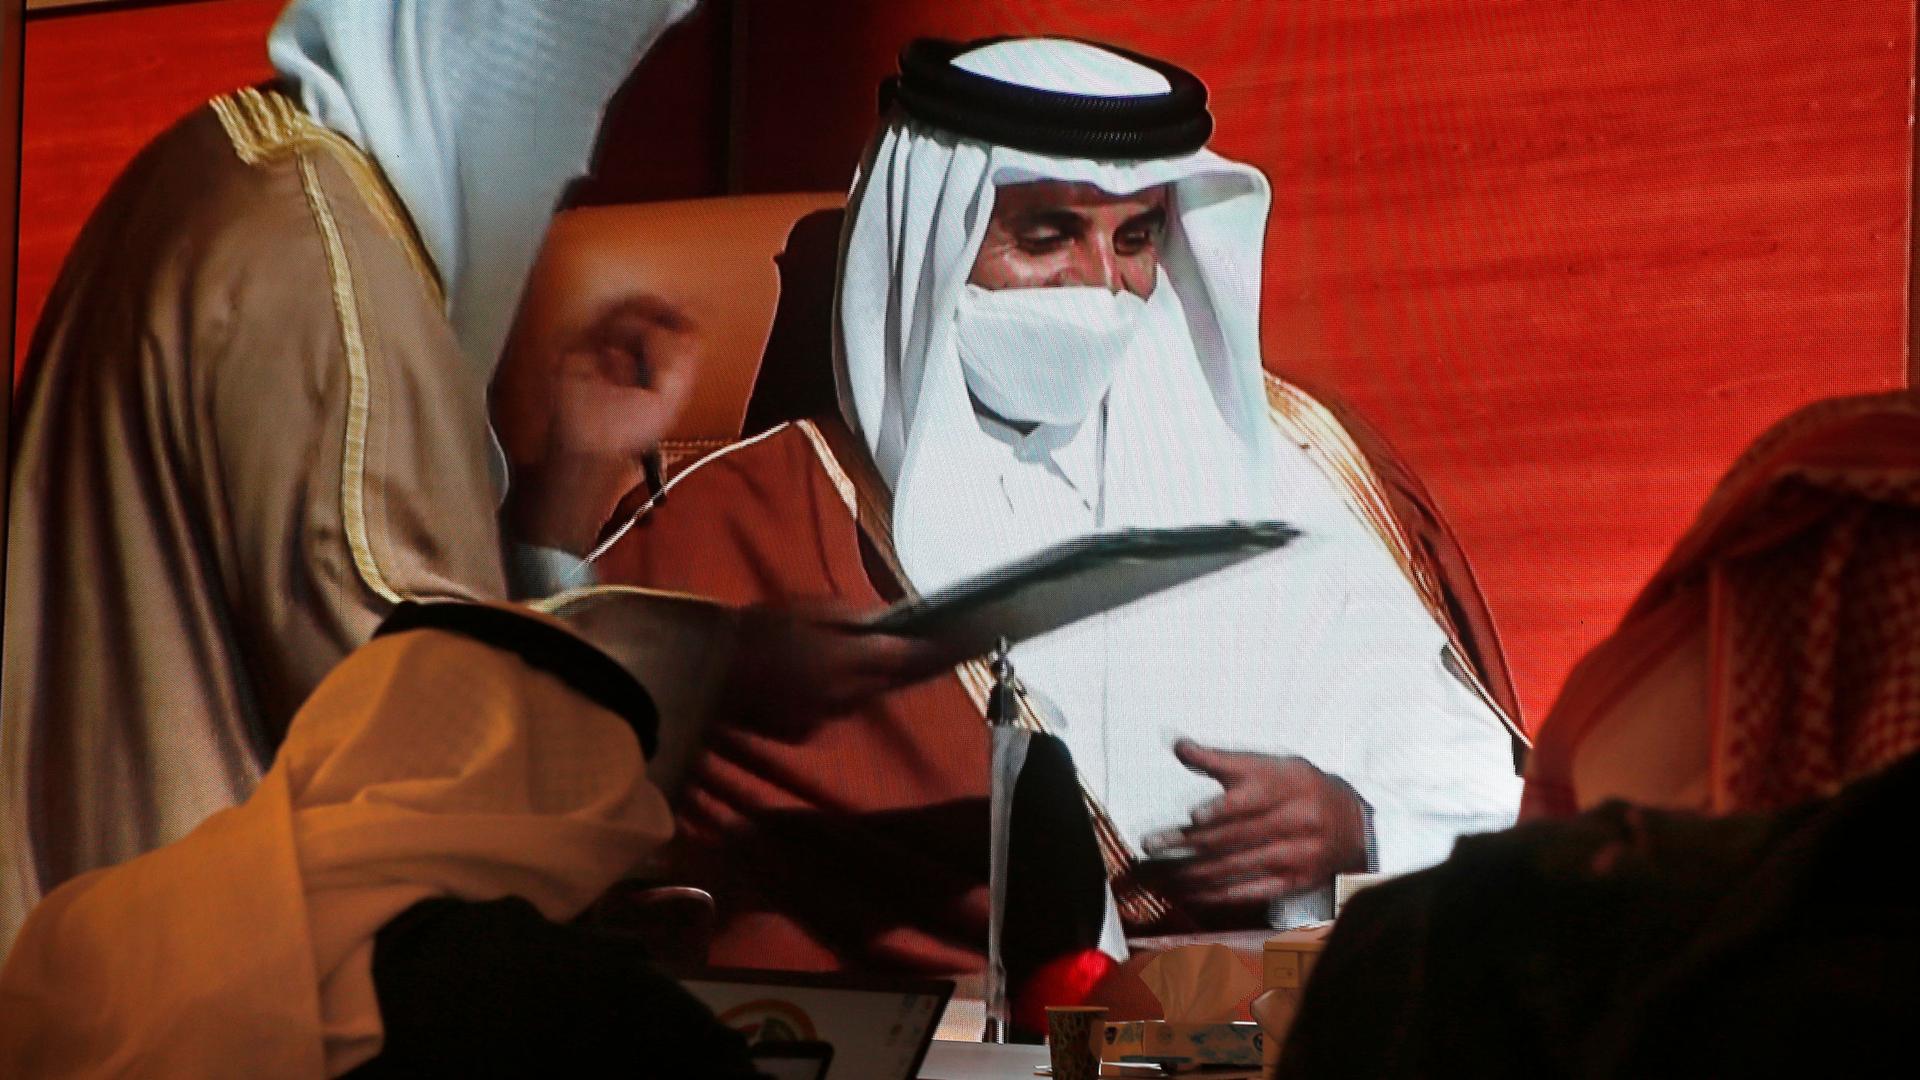 Two people are shown from behind wearing head coverings and looking up at a screen showing with Qatar's Emir Sheikh Tamim bin Hamad Al Thani.